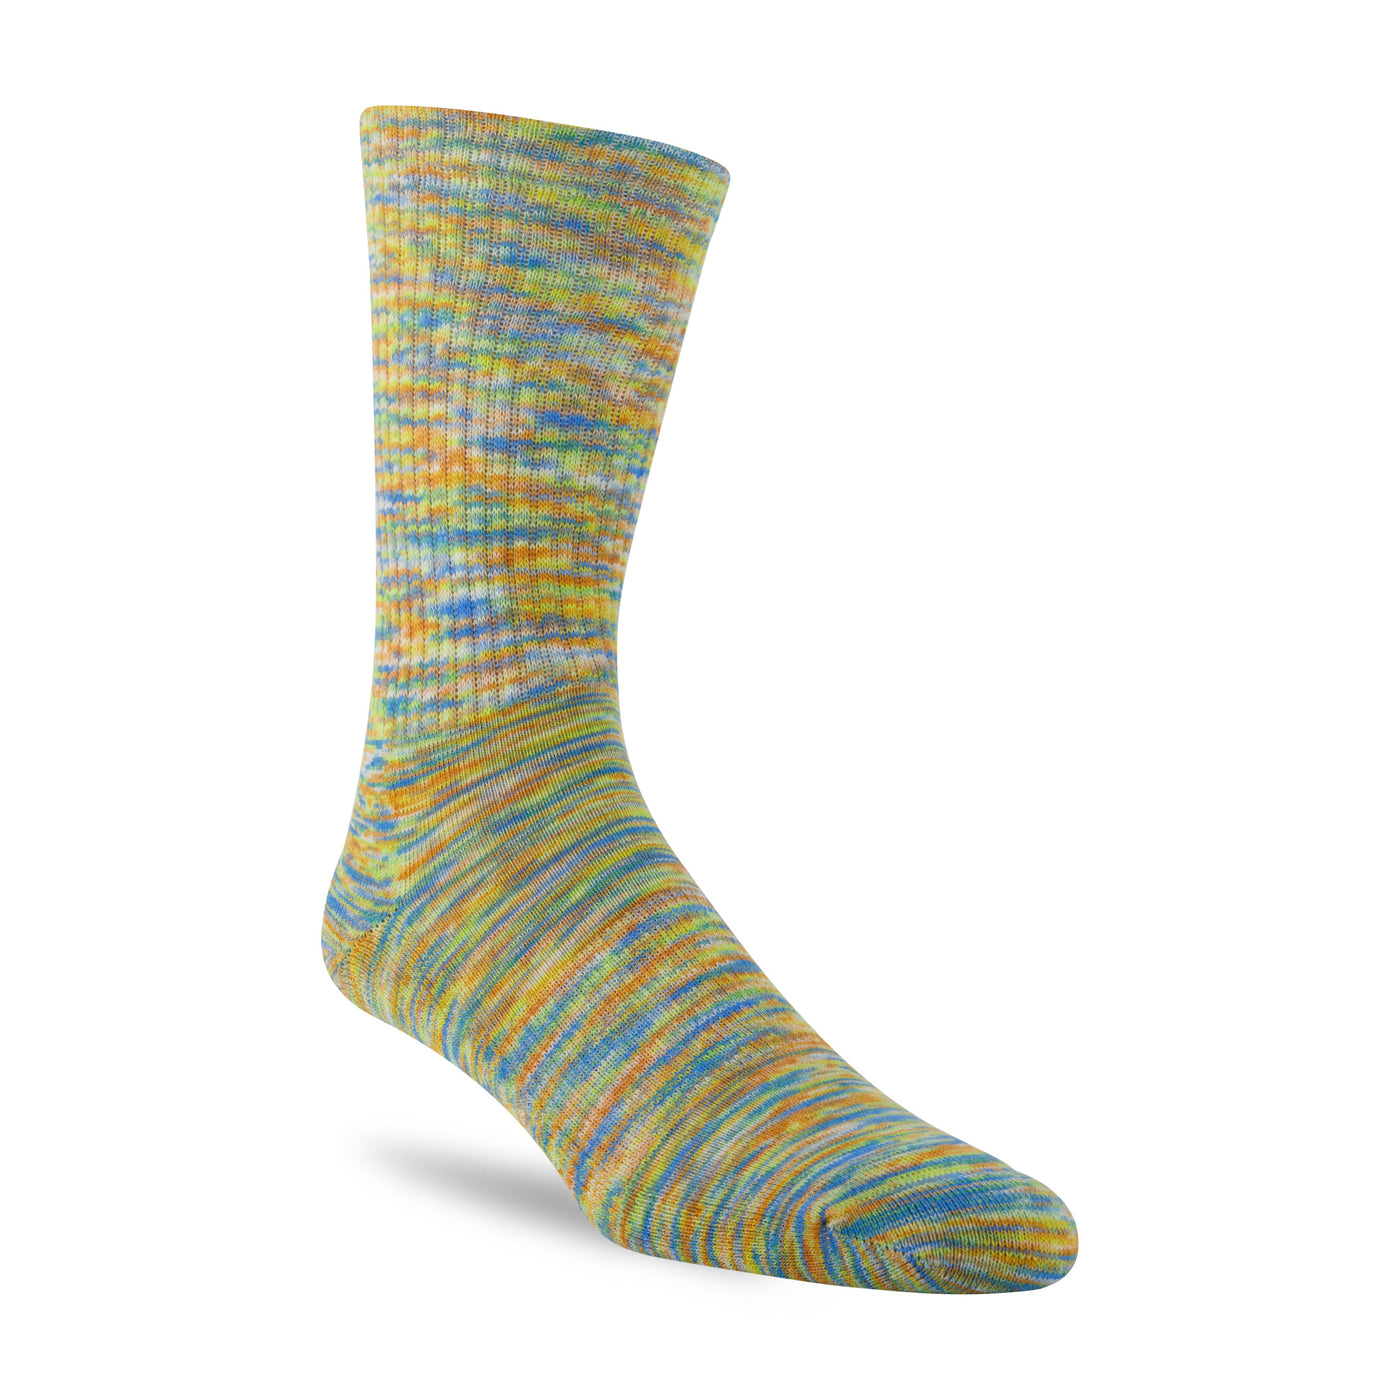 2 PAIR - Great Sox Spaced Dyed Cotton Crew Sock (CLEARANCE)